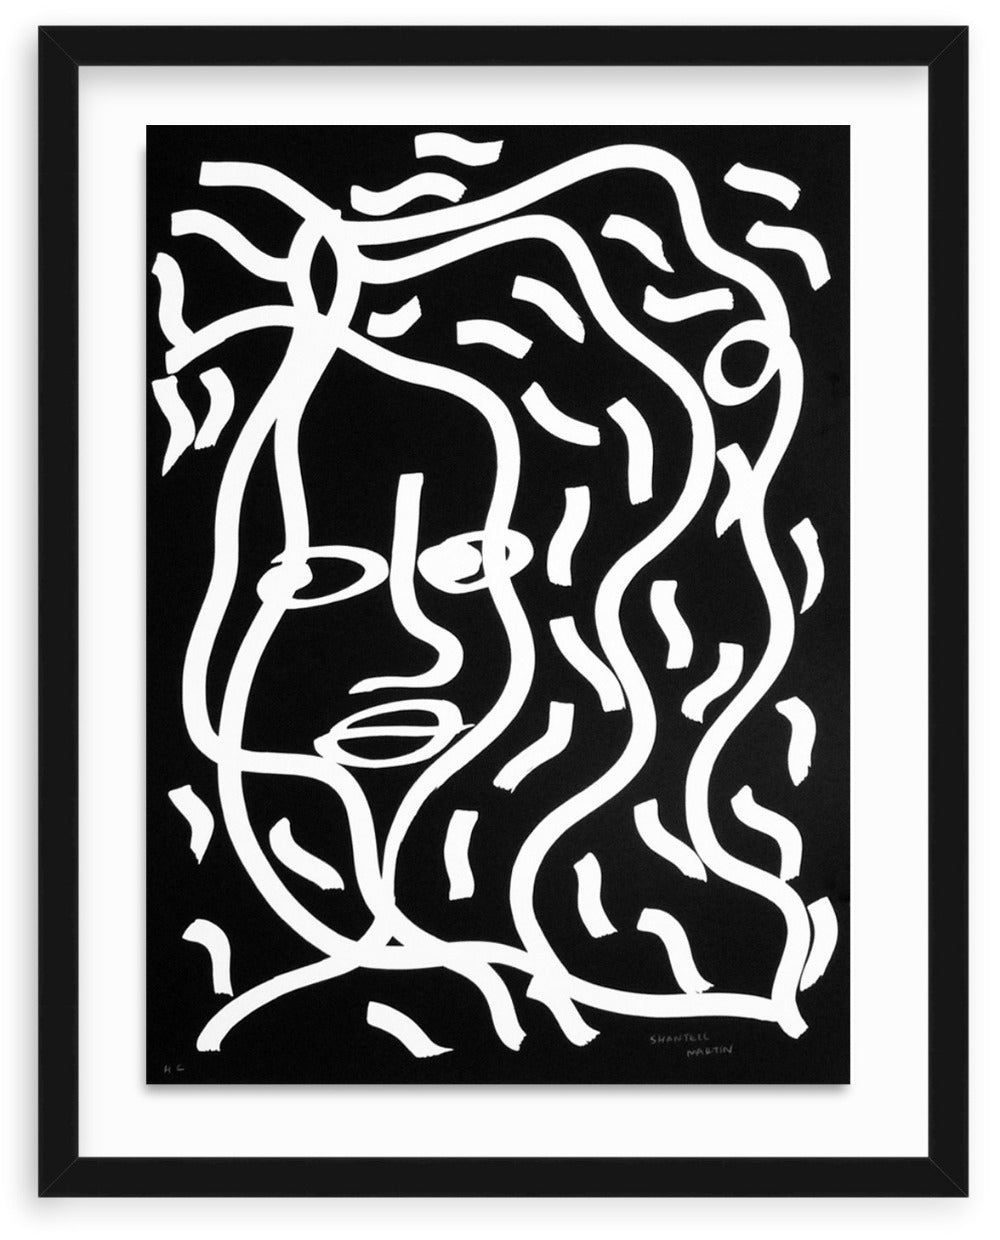 Four-Signed Lithograph-Lithograph-Shantell Martin Shop